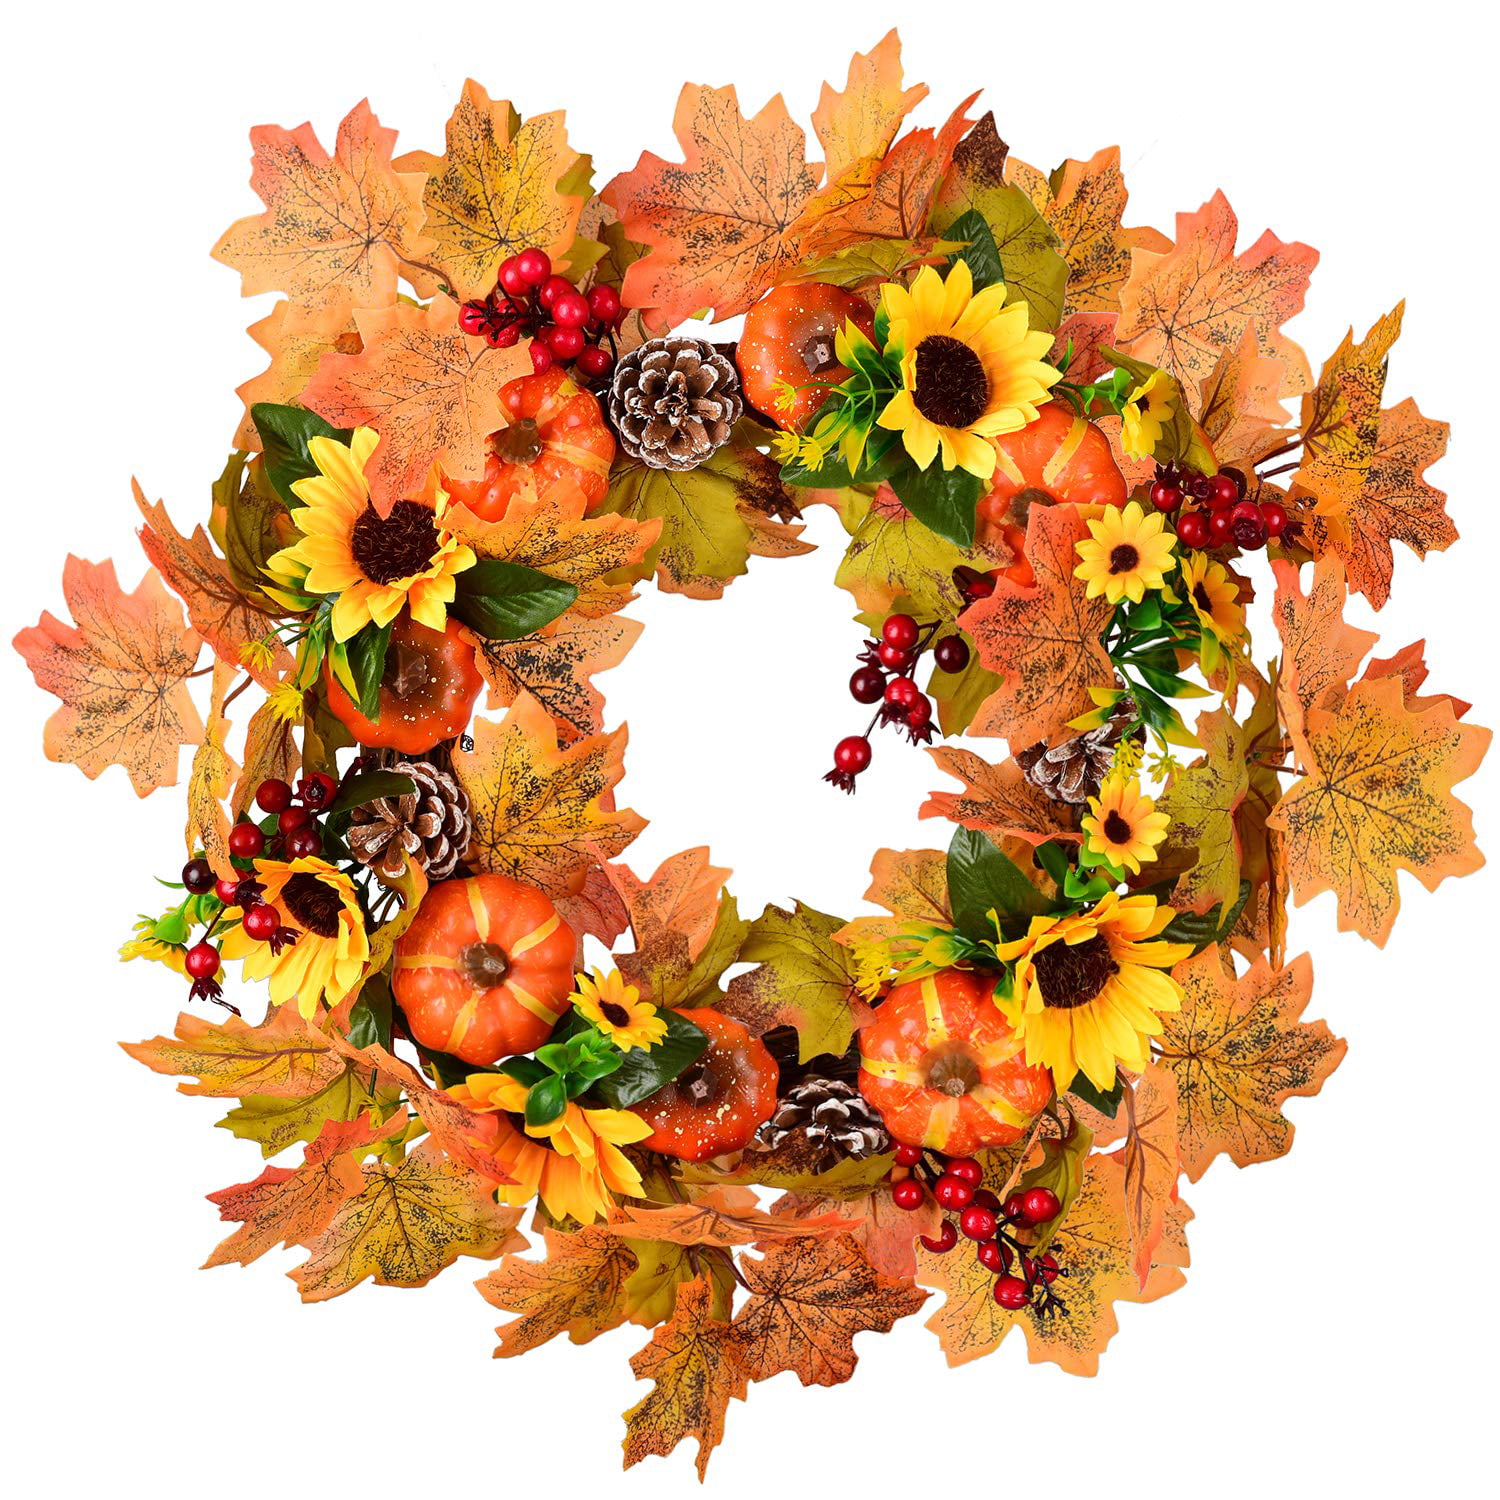 FLORAL WREATH SUNFLOWER BERRIES PINECONES APPROX 22" D 